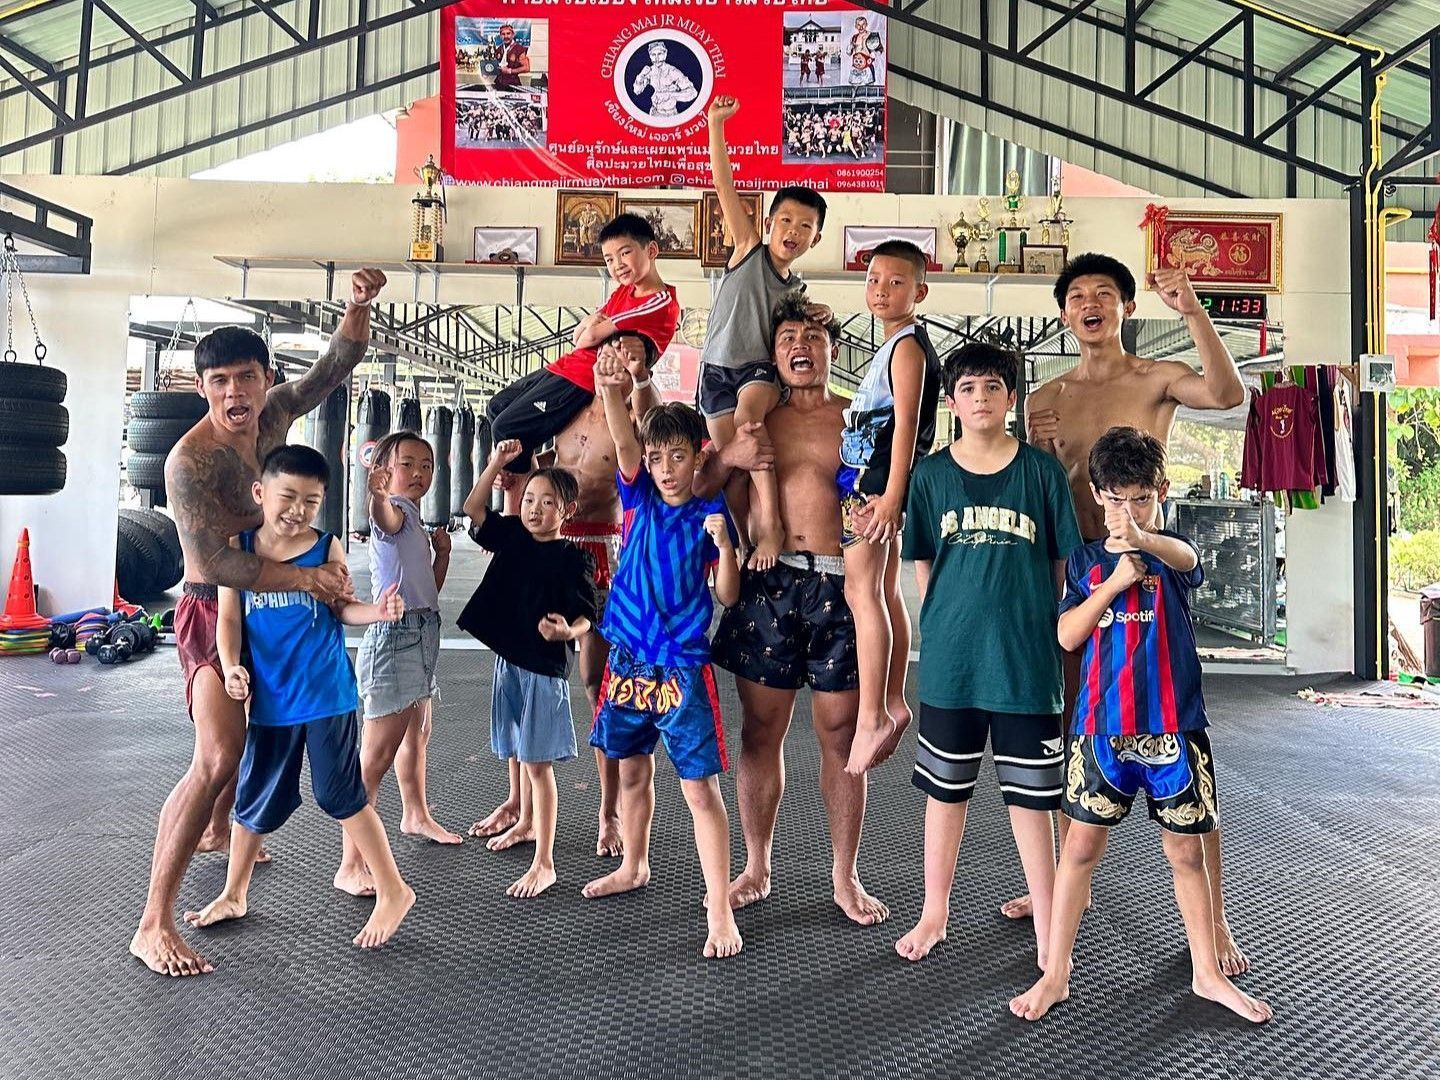 Adults and children pose at Chiangmai JR Muaythai Gym